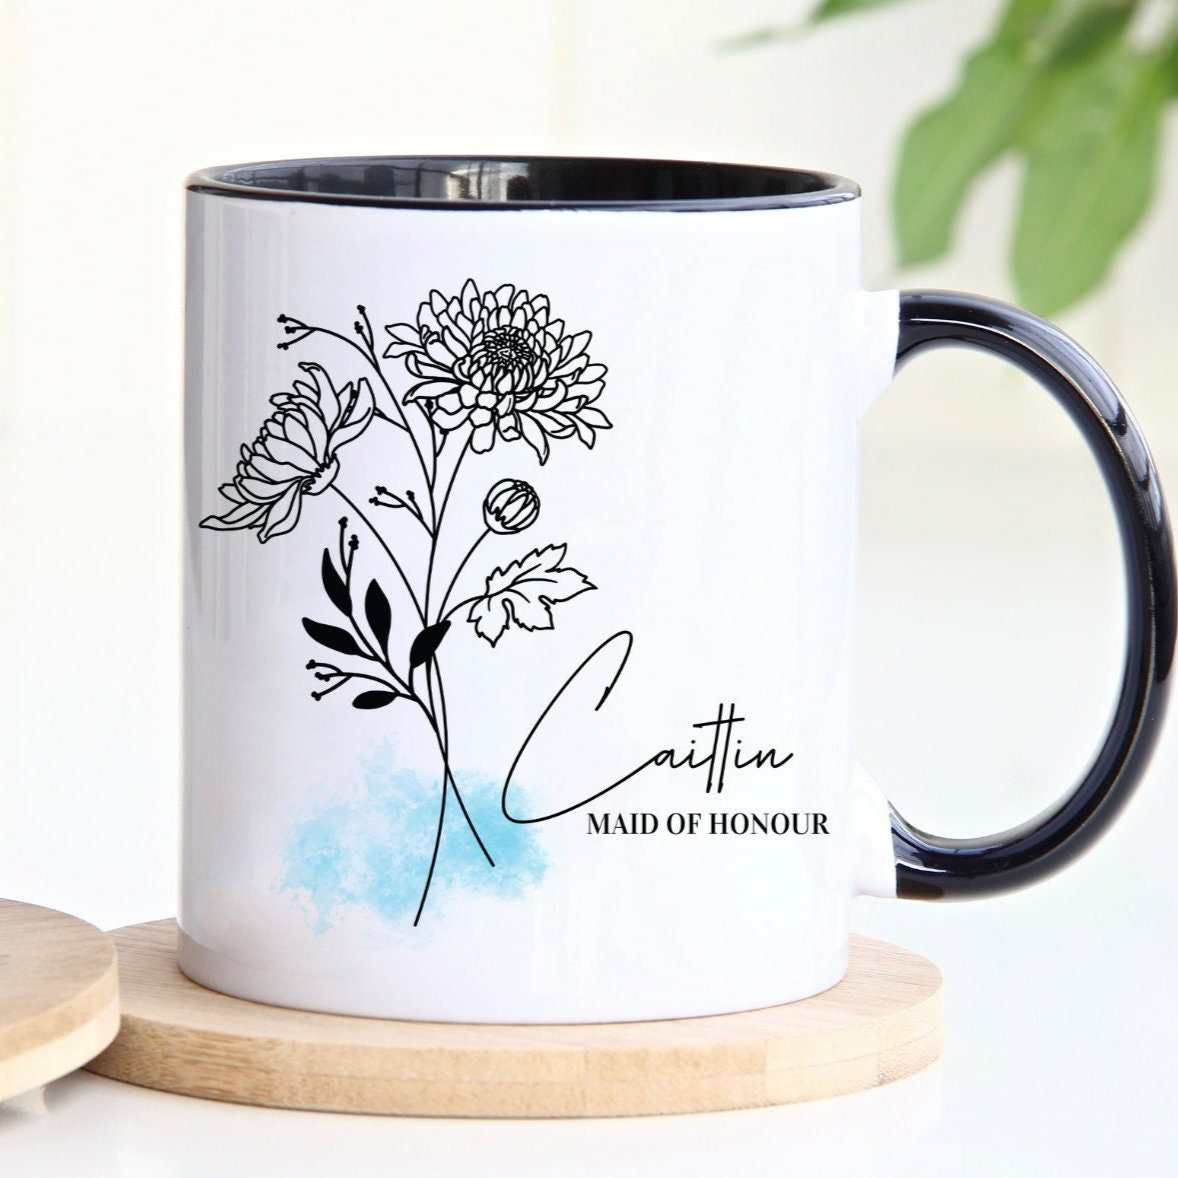 Iced Coffee Glass Cup with Personalized Birth Month Flower and Name - Gift for Her Birthday, Mothers Day Gift, Bridesmaid Gift Ideas from BluChi